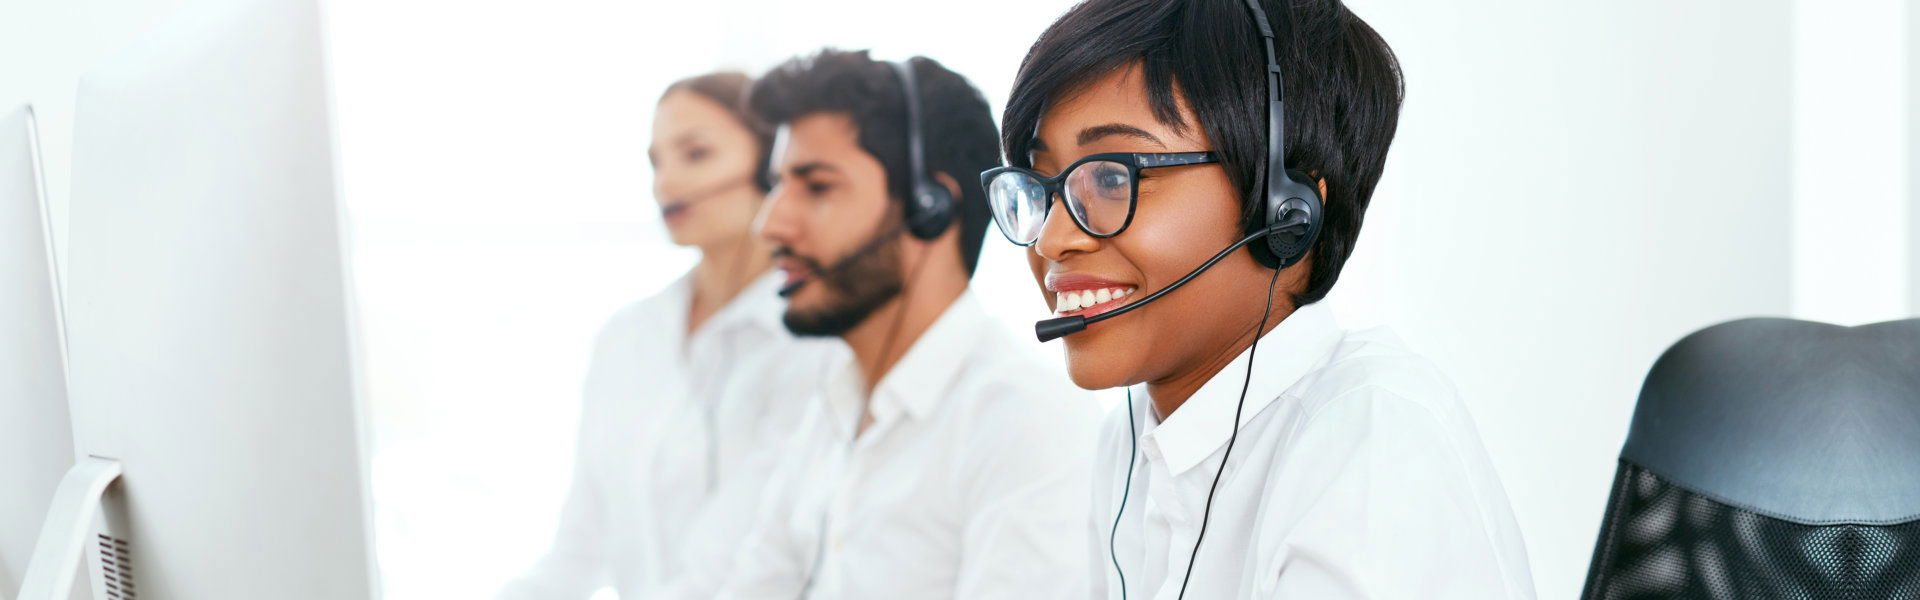 group of people wearing headset